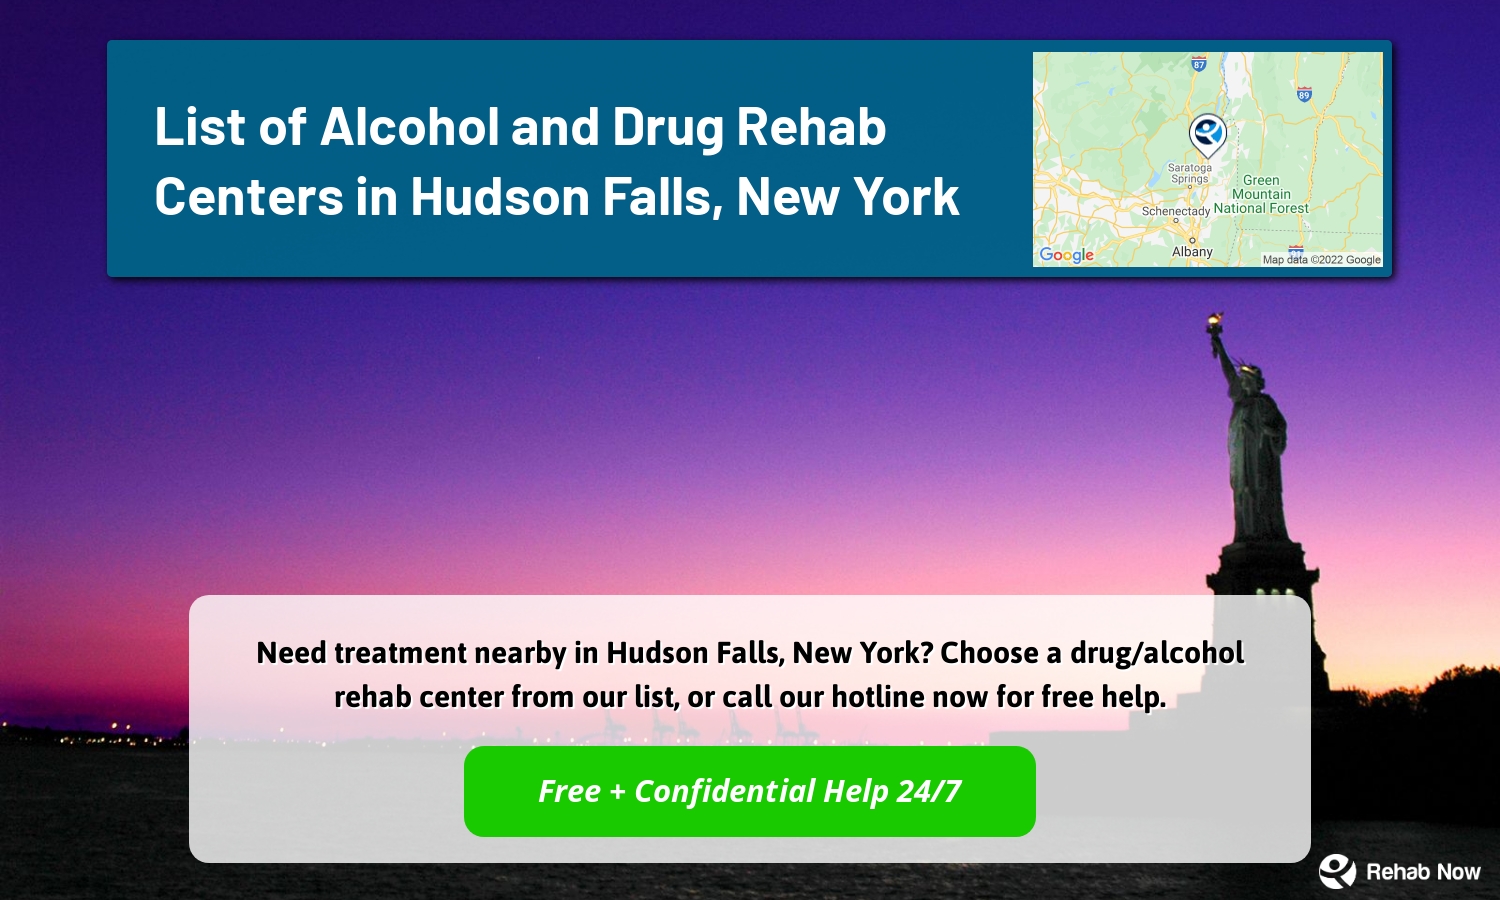 Need treatment nearby in Hudson Falls, New York? Choose a drug/alcohol rehab center from our list, or call our hotline now for free help.